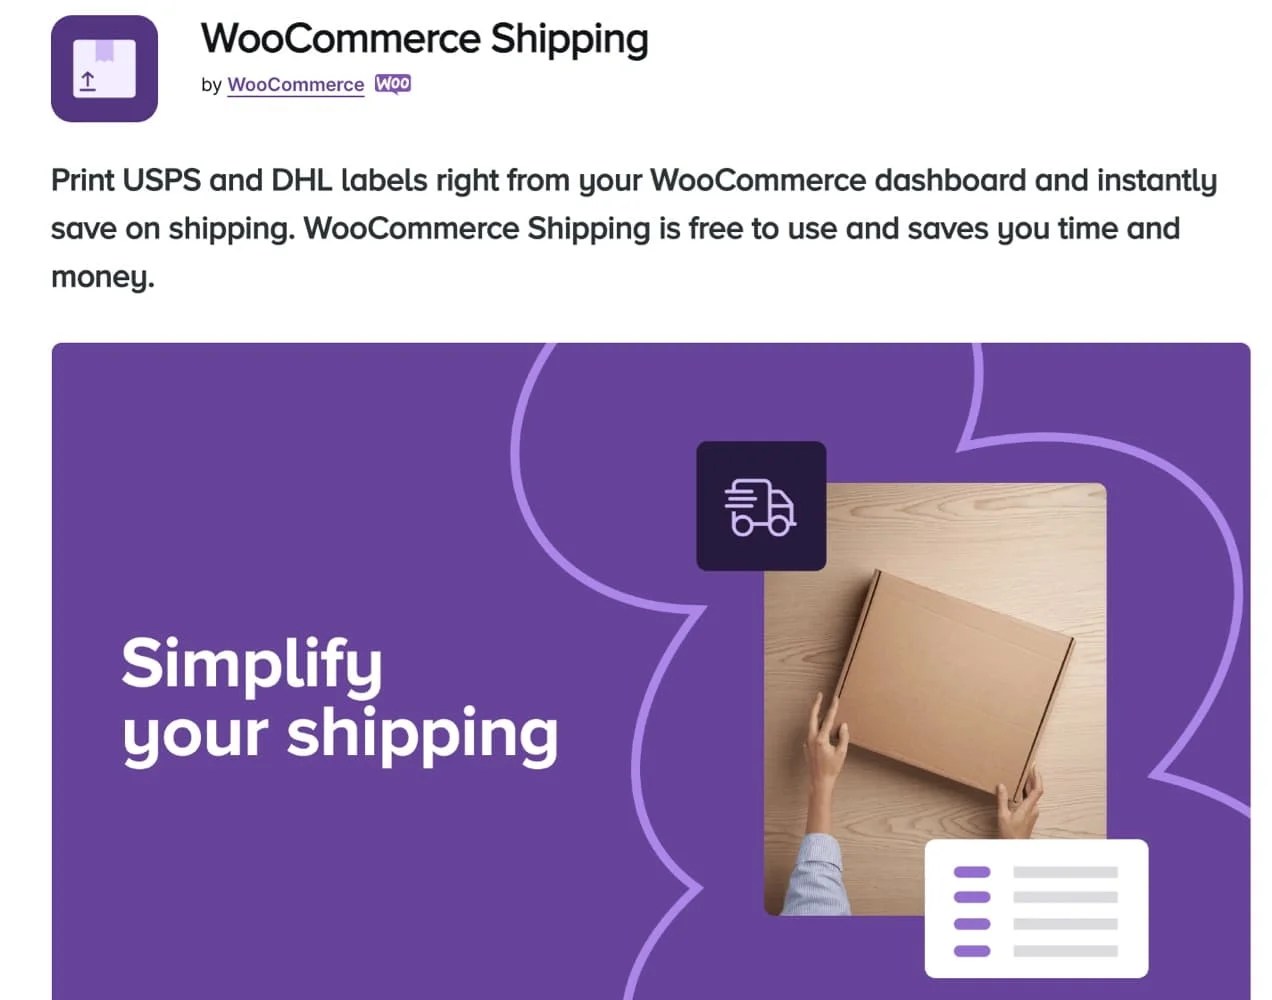 WooCommerce Shipping page